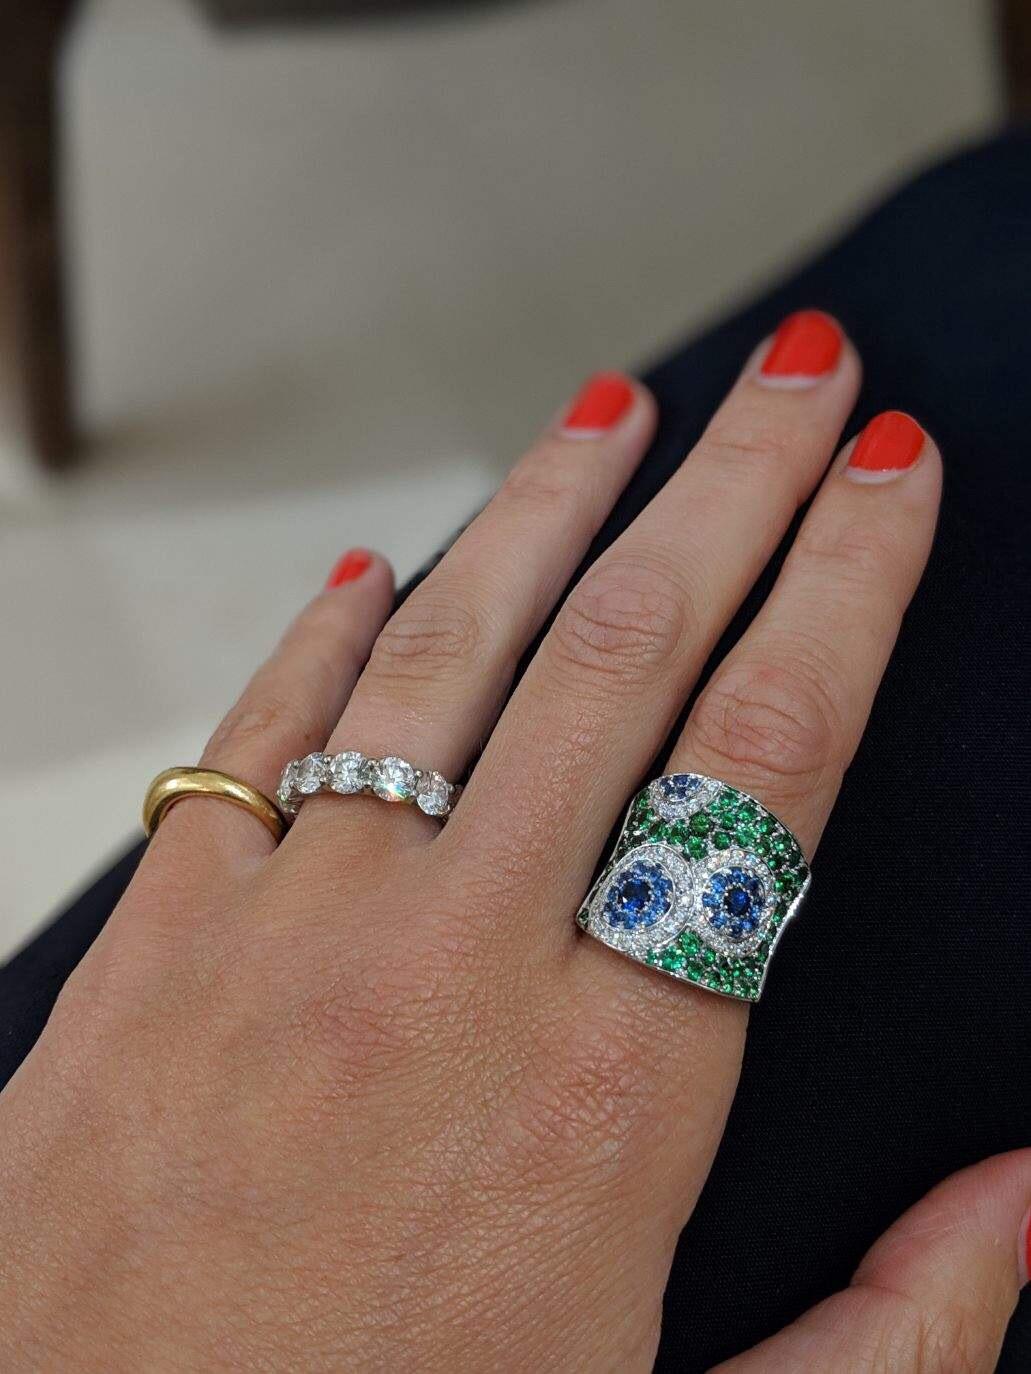 This Cellini Jewelers ring features a Kaleidoscope of white diamonds, and blue sapphire which are set within a green tsavorite concave shaped ring. Set in 18 karat white gold. 
This whimsical design is part of the Exclusive collection created for